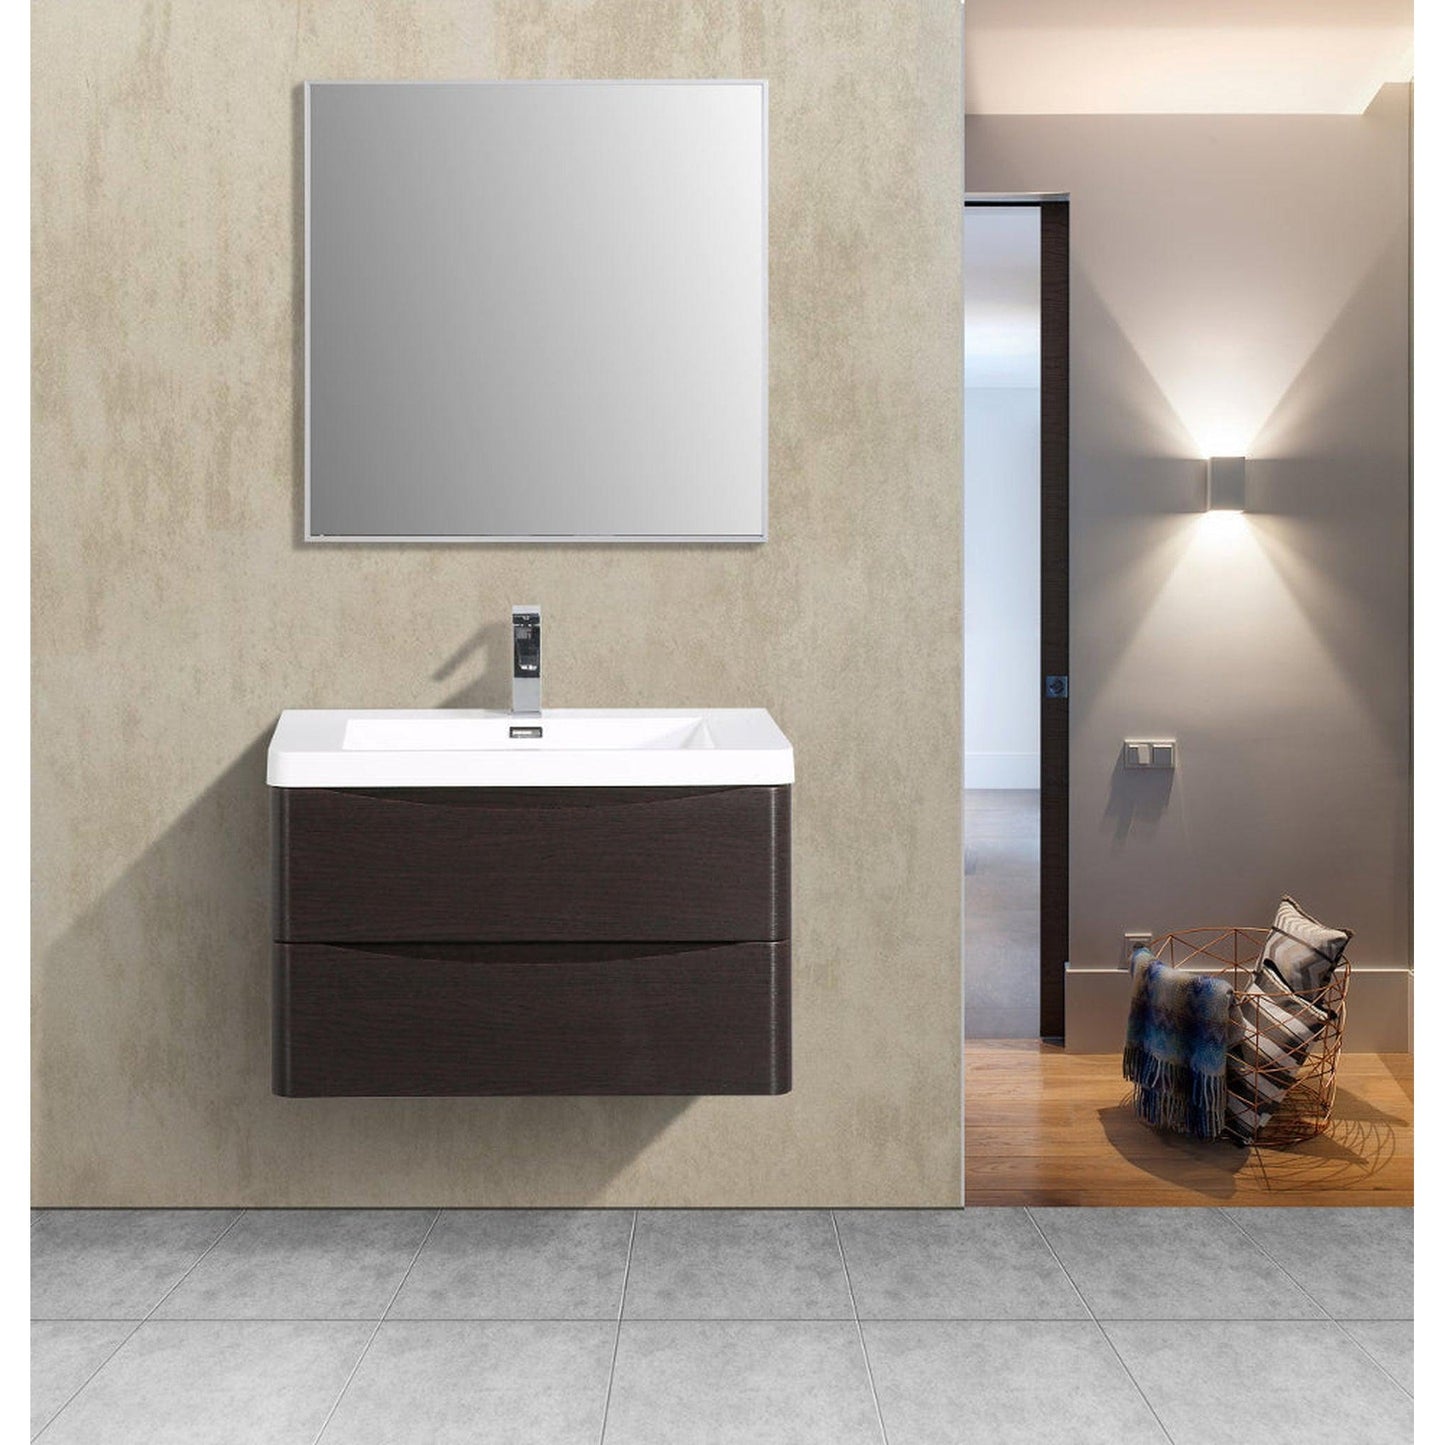 Eviva Smile 30" x 20" Chestnut Wall-Mounted Bathroom Vanity With White Single Integrated Sink